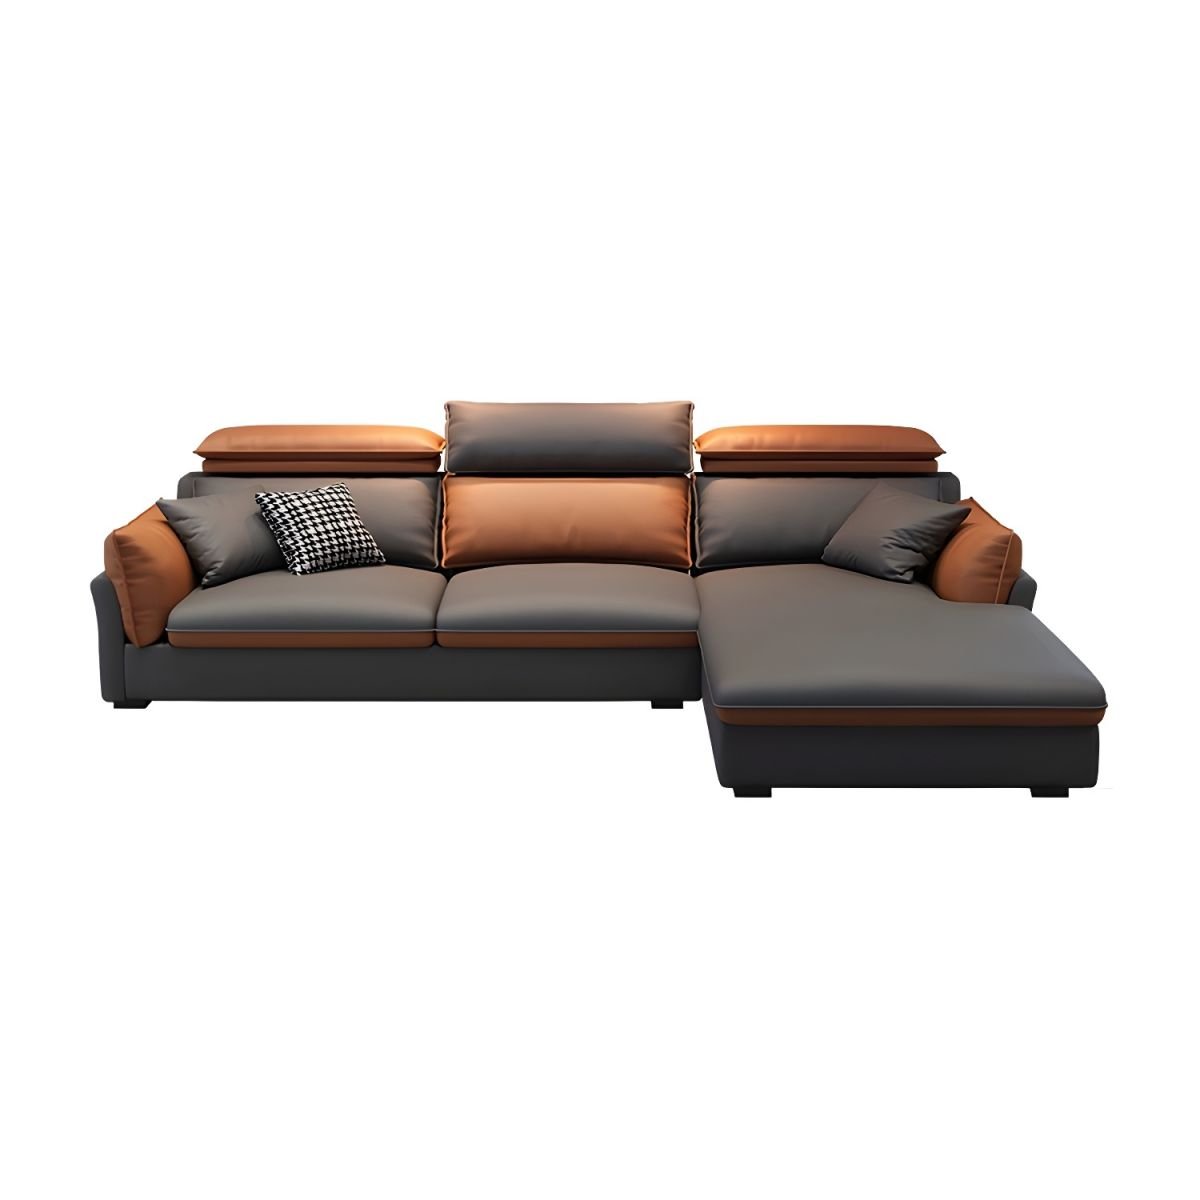 Contemporary Pillow Top Arm Sectional Sofa in Gray and Orange with Adjustable Back - 98"L x 71"W x 31"H Tech Cloth